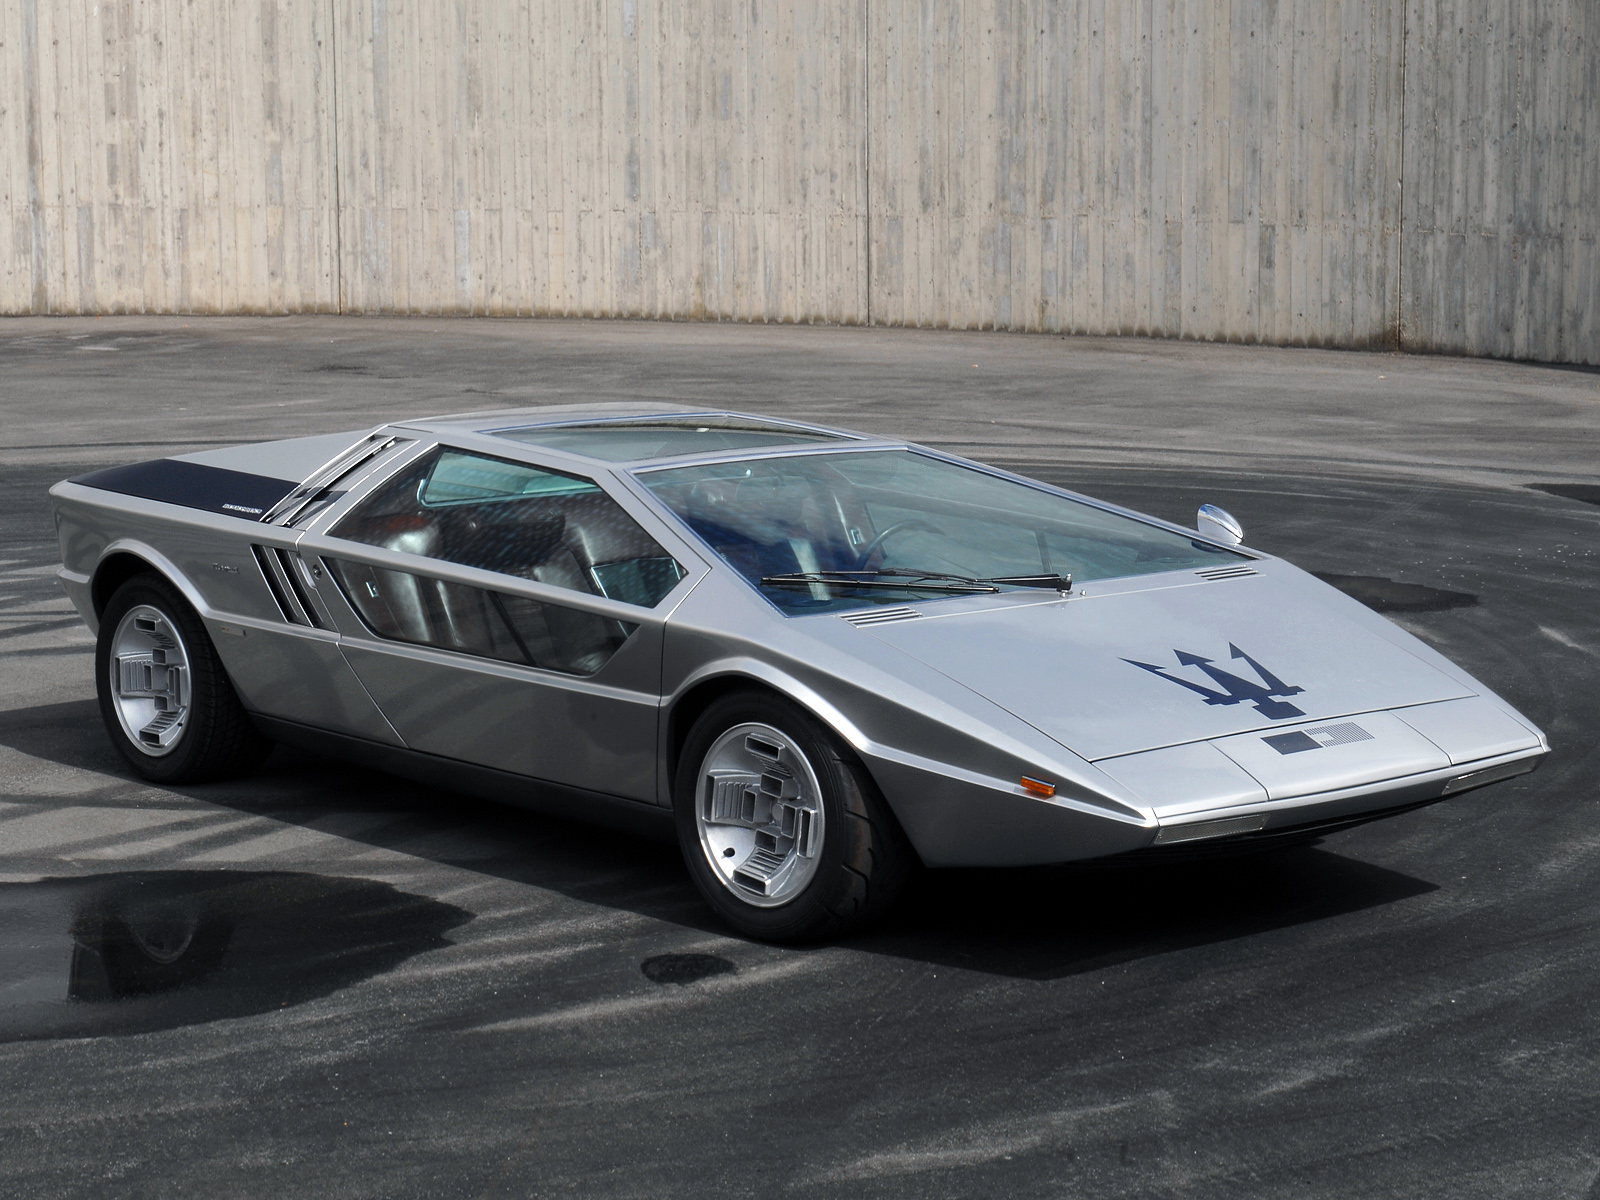 The Maserati Boomerang was styled by Giorgetto Giugiaro, who drew inspiration from this prototype for the design of a succession of new cars.